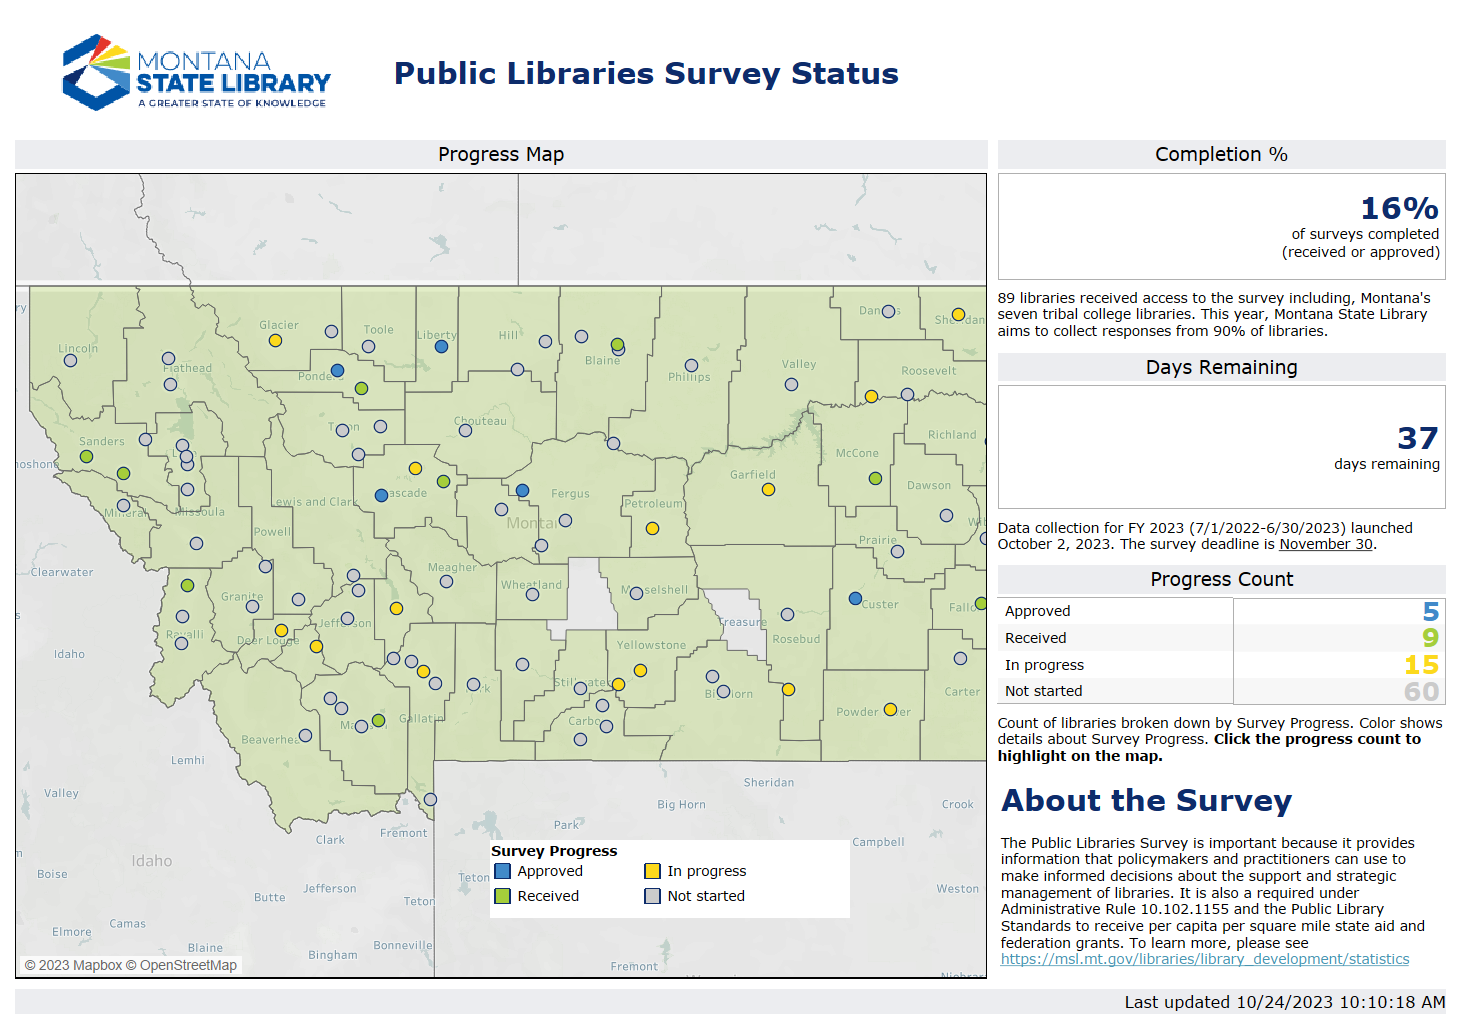 Screenshot from the Public Libraries Survey Status dashboard